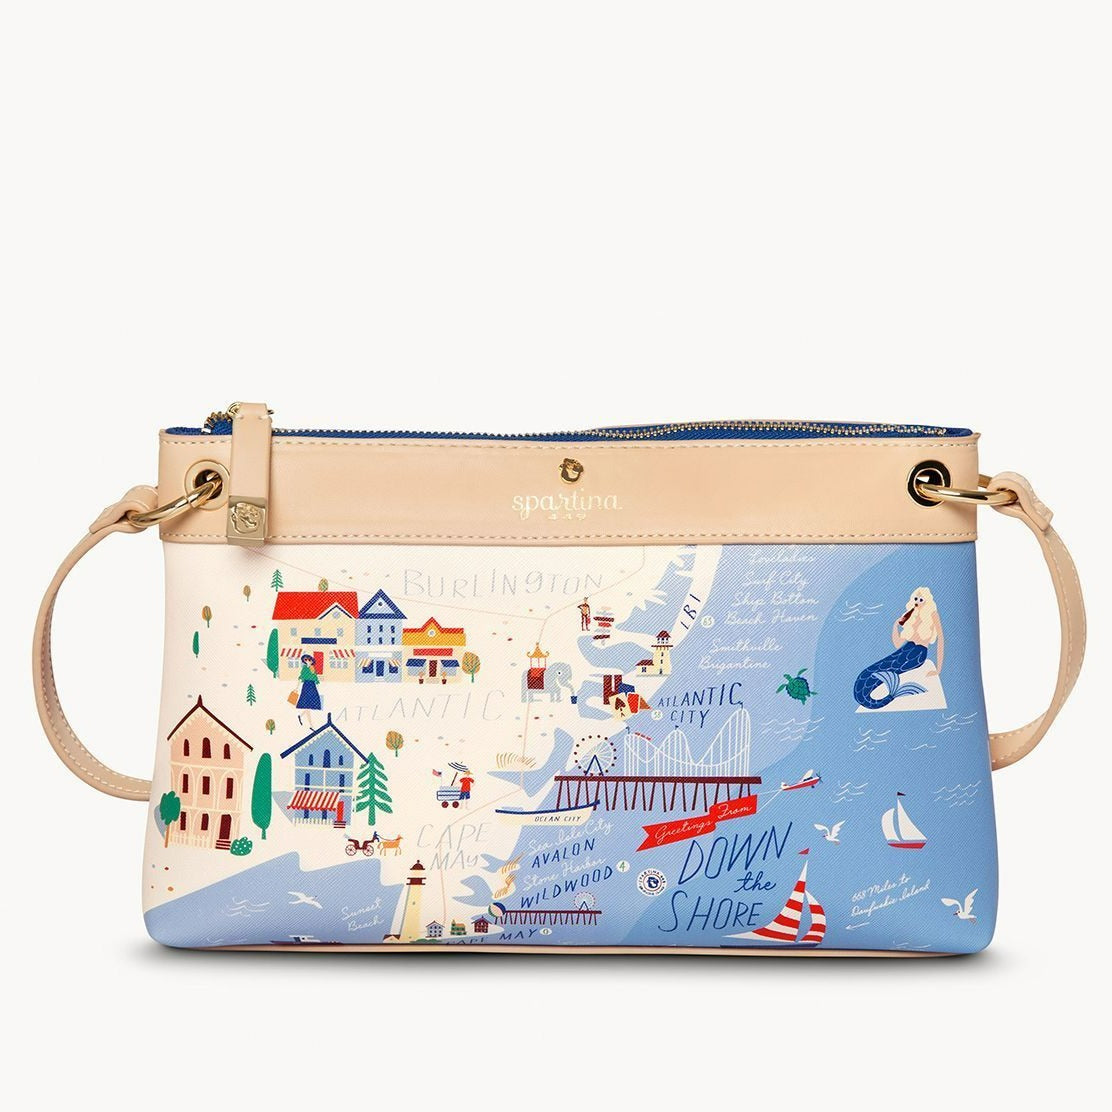 Spartina Spartina Down The Shore Cross Body available at The Good Life Boutique